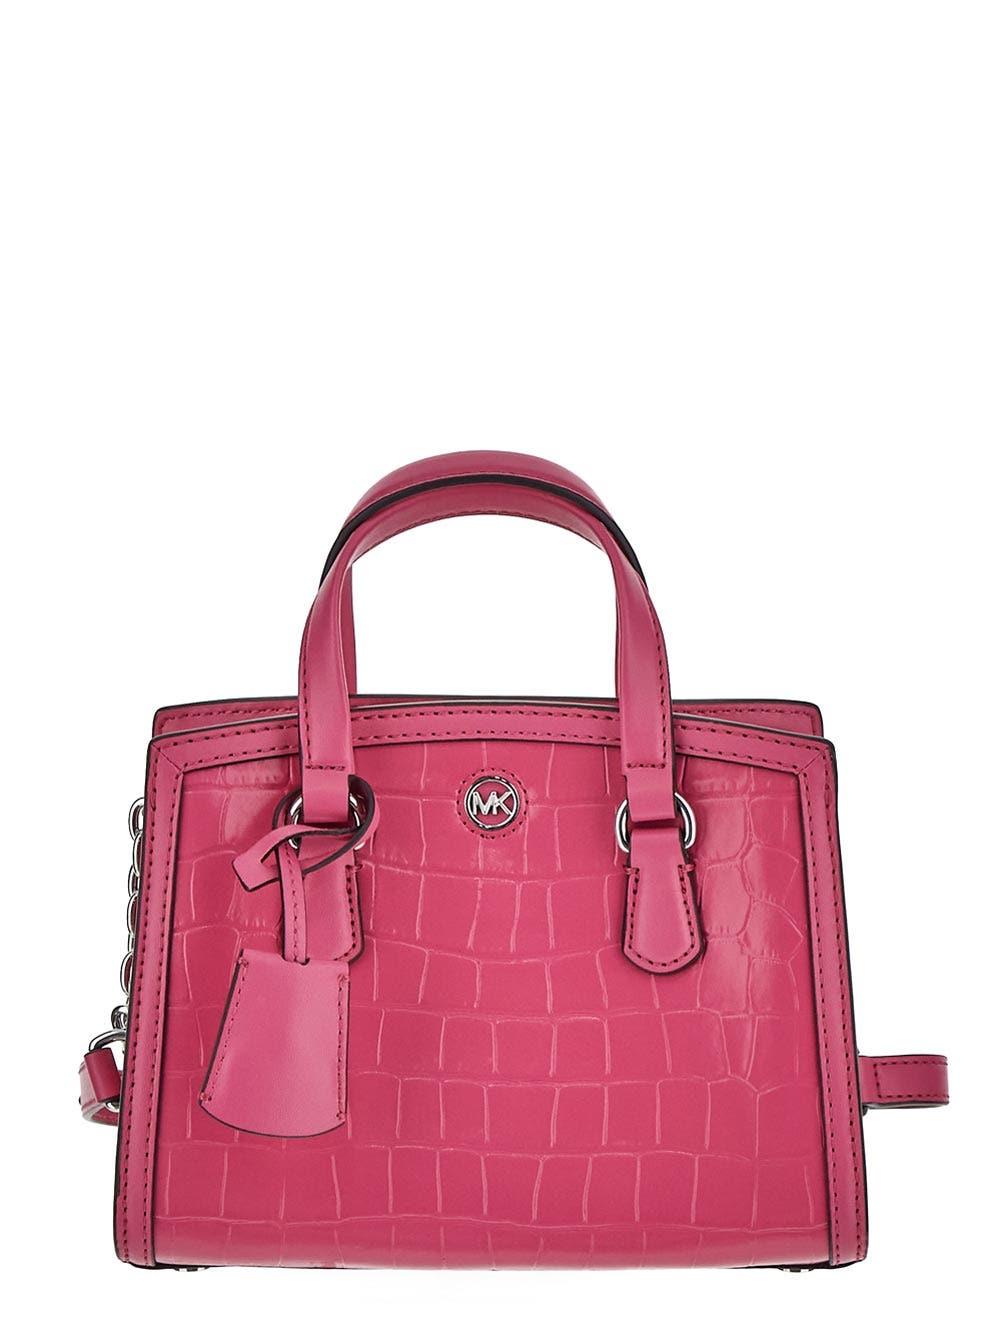 MICHAEL Michael Kors Small Croc Leather Bag in Pink | Lyst